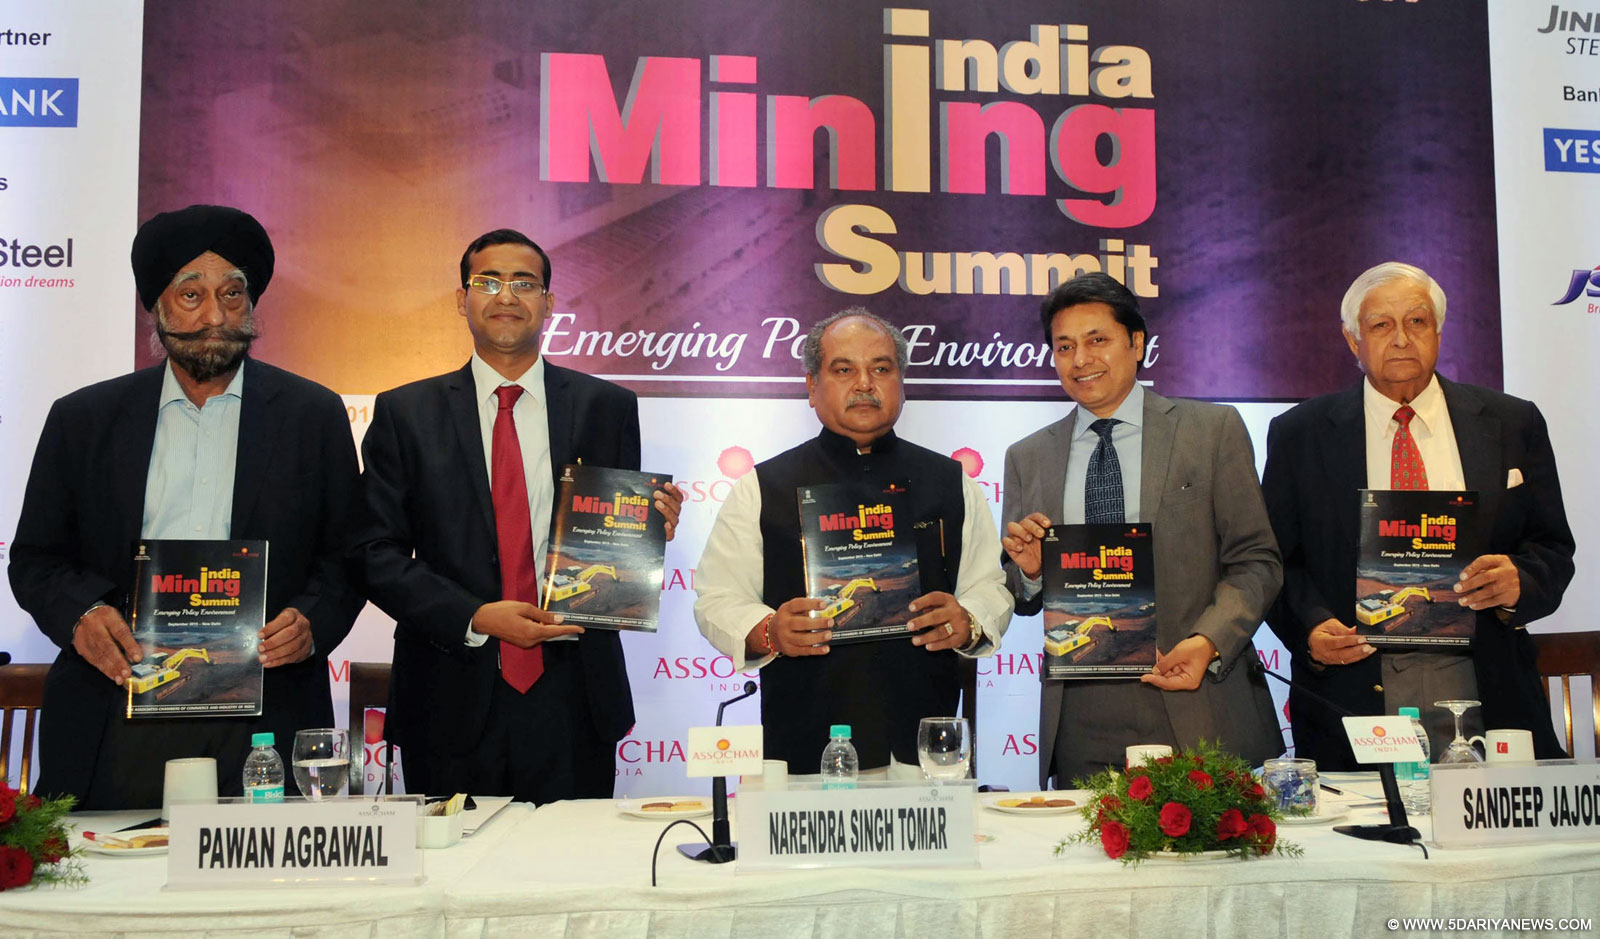 The Union Minister for Mines and Steel, Shri Narendra Singh Tomar releasing a brochure at the India Mining Summit, in New Delhi on September 22, 2015.